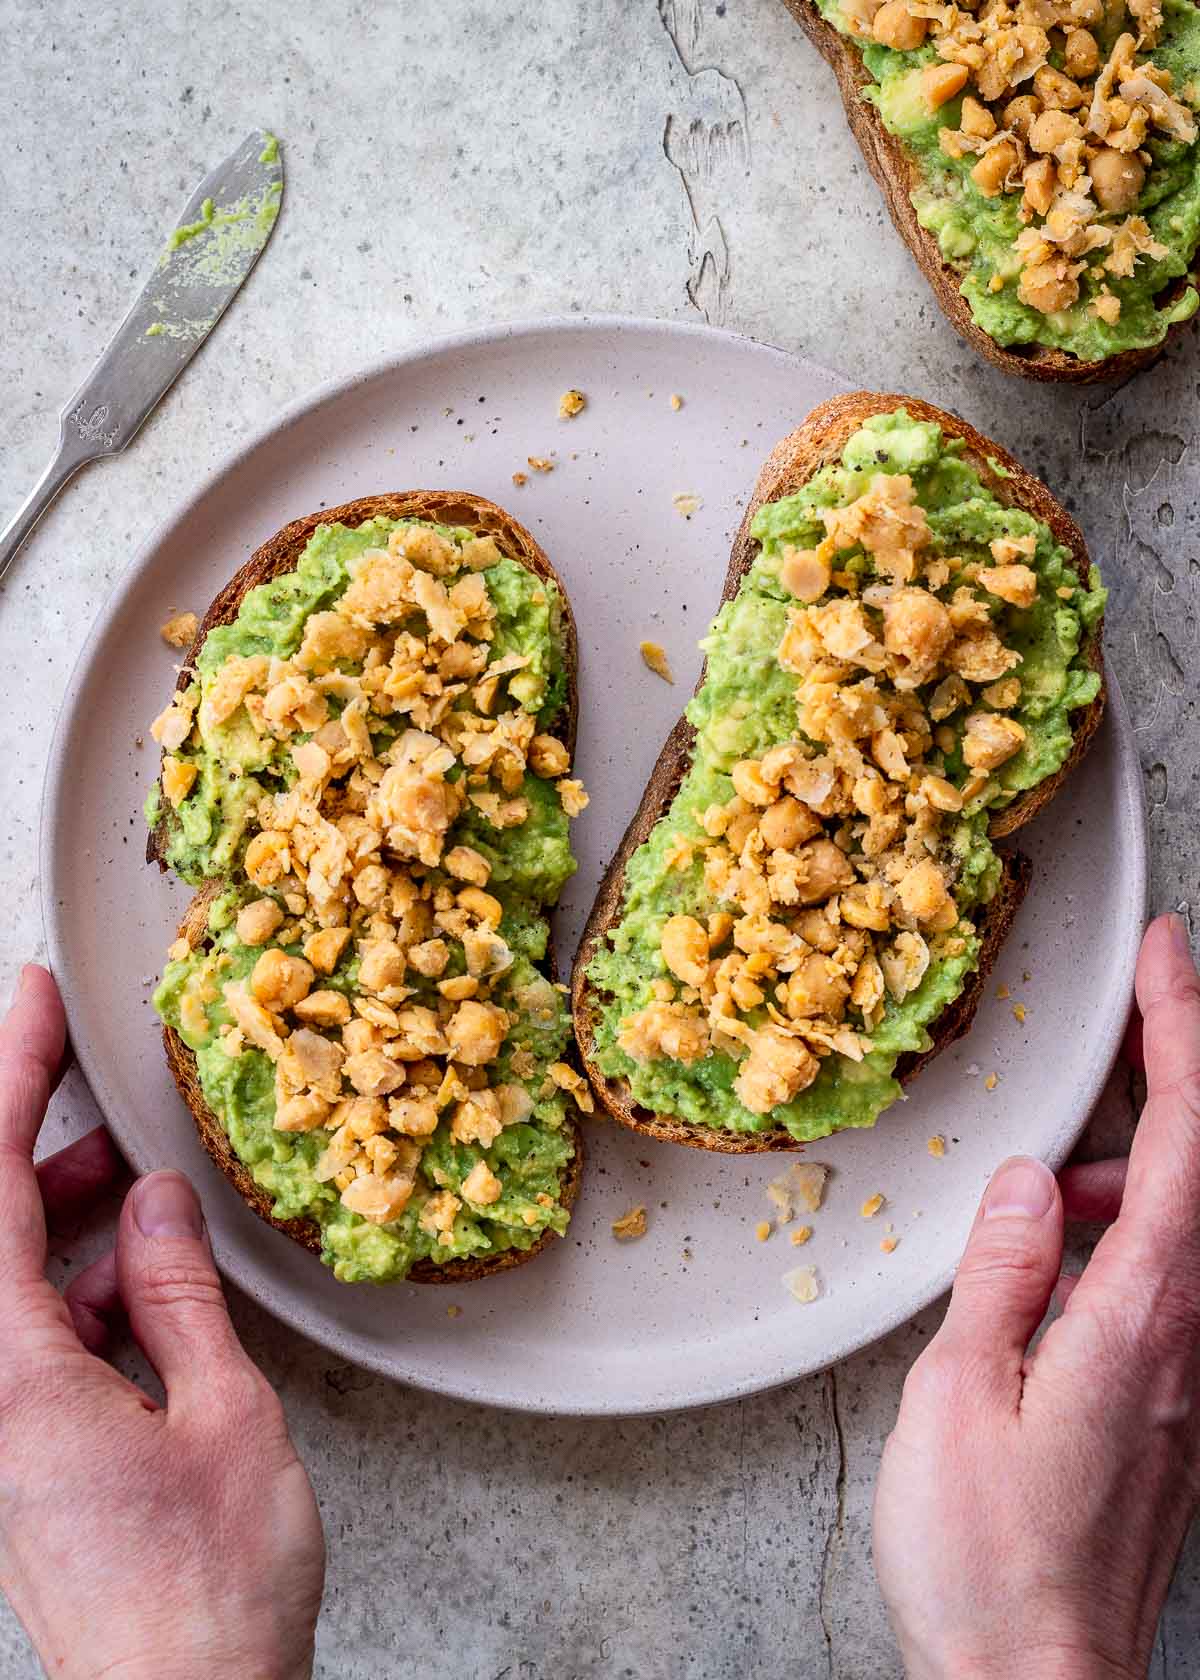 Vegan high protein avocado toast topped with chickpeas.